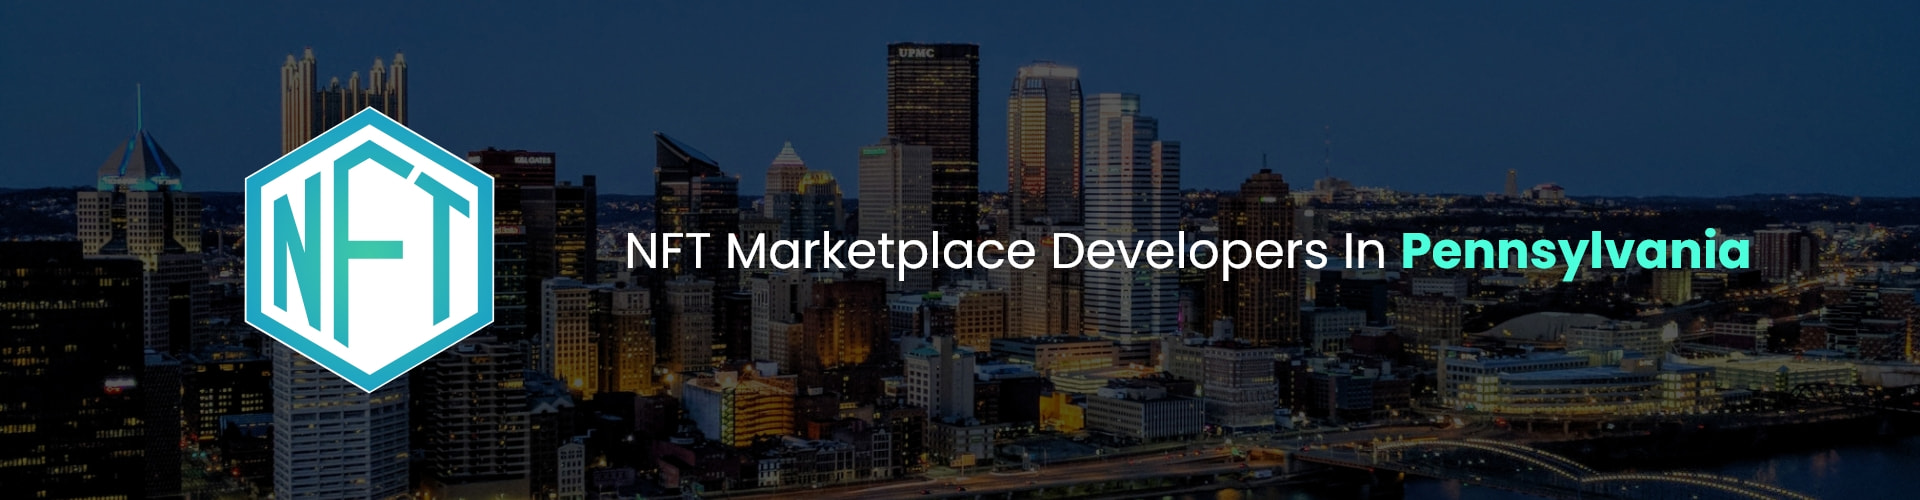 hire nft marketplace developers in pennsylvania